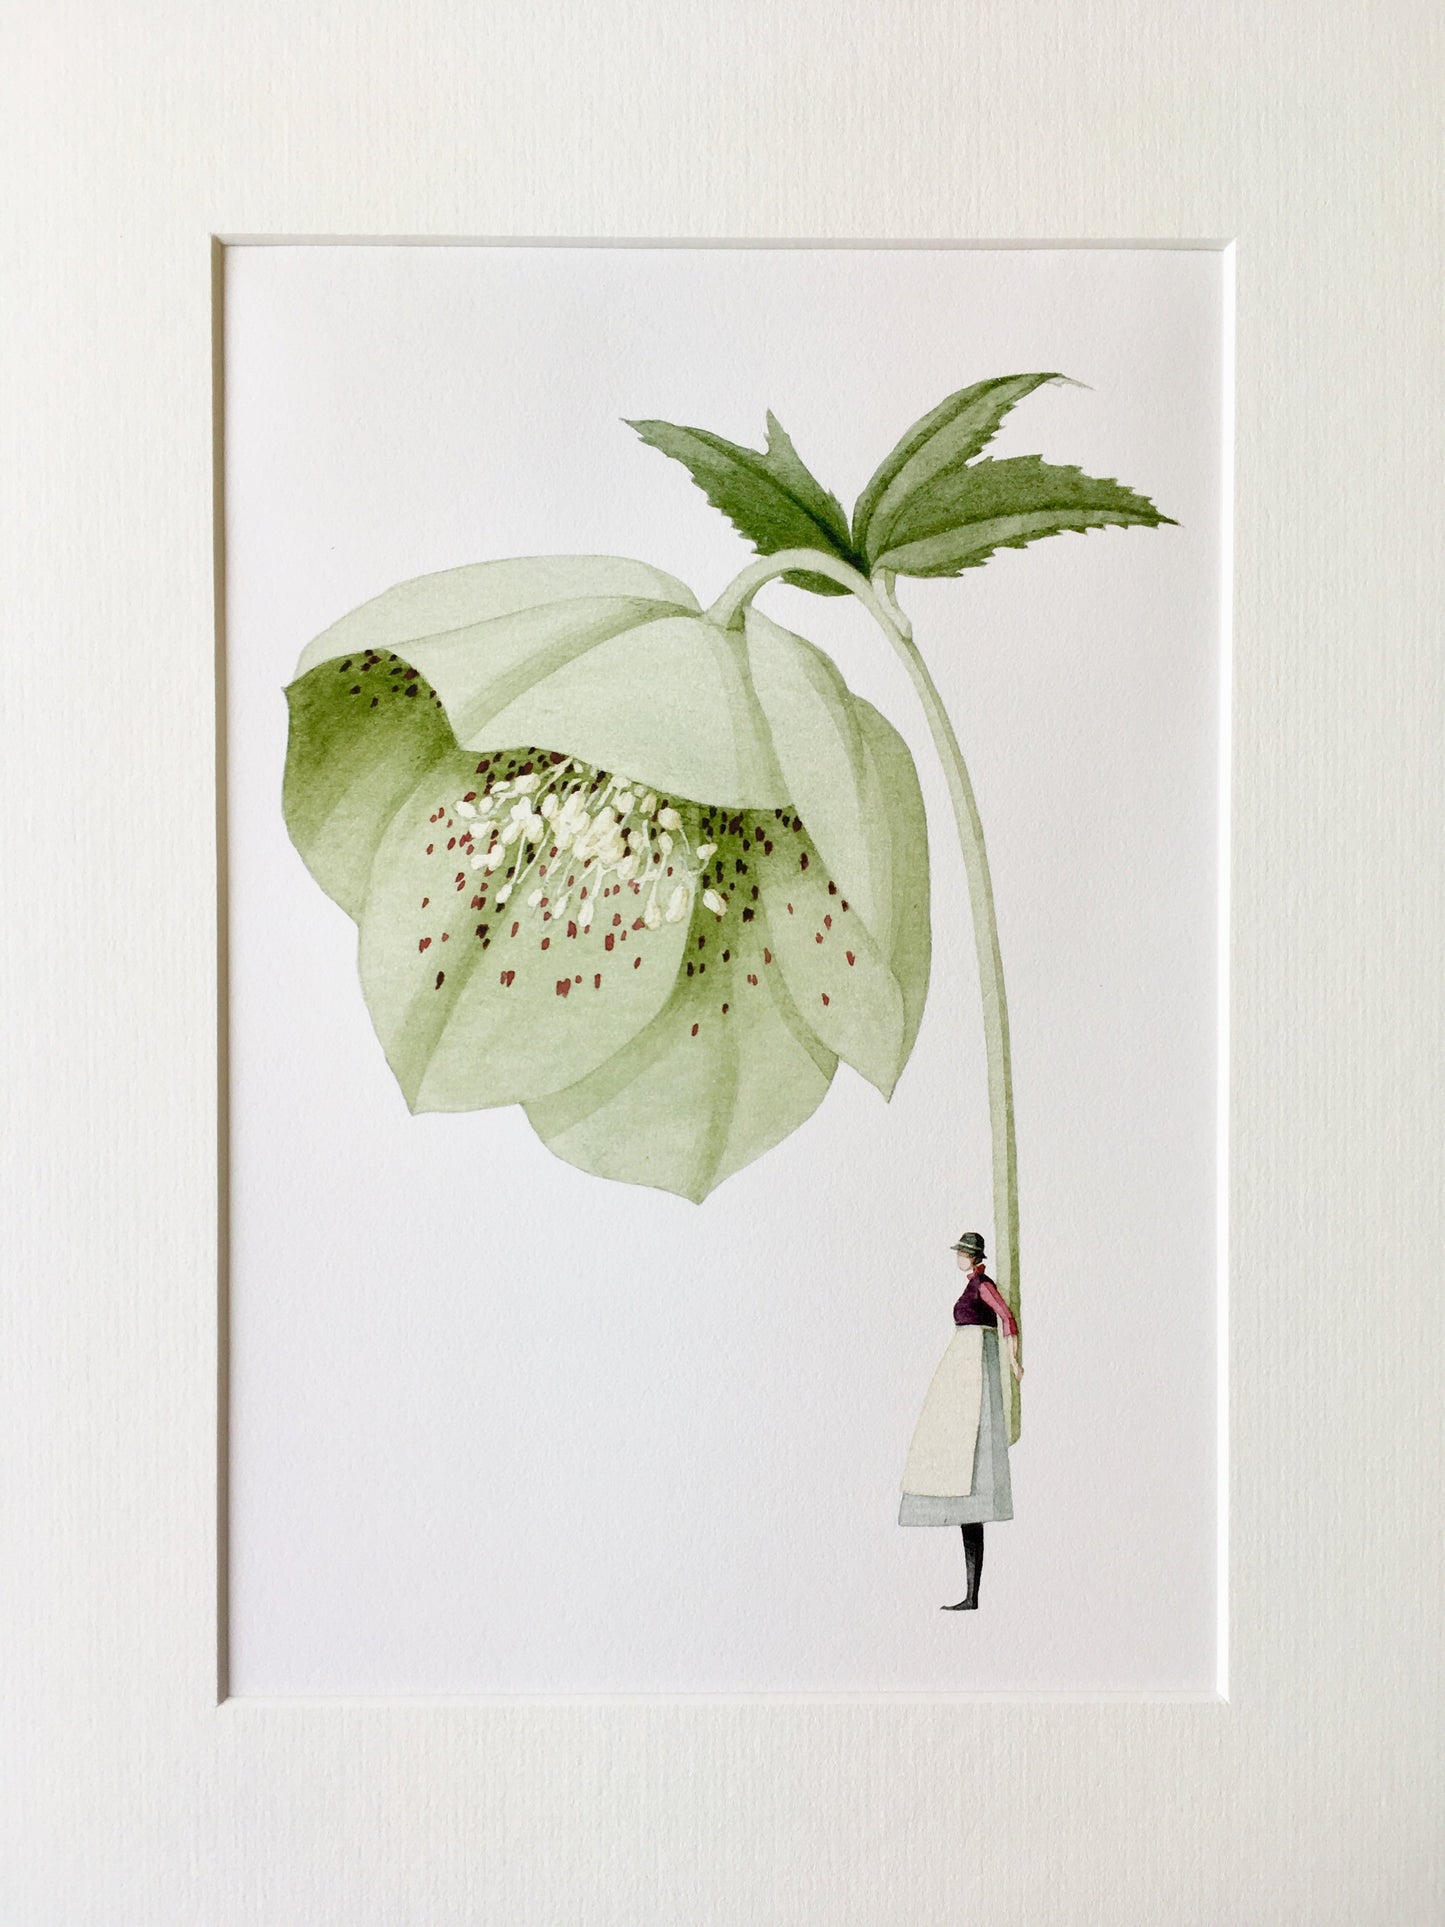 giclee print, mounted print, print, hellebore, illustration, made in england, green flowers, archival paper, art print